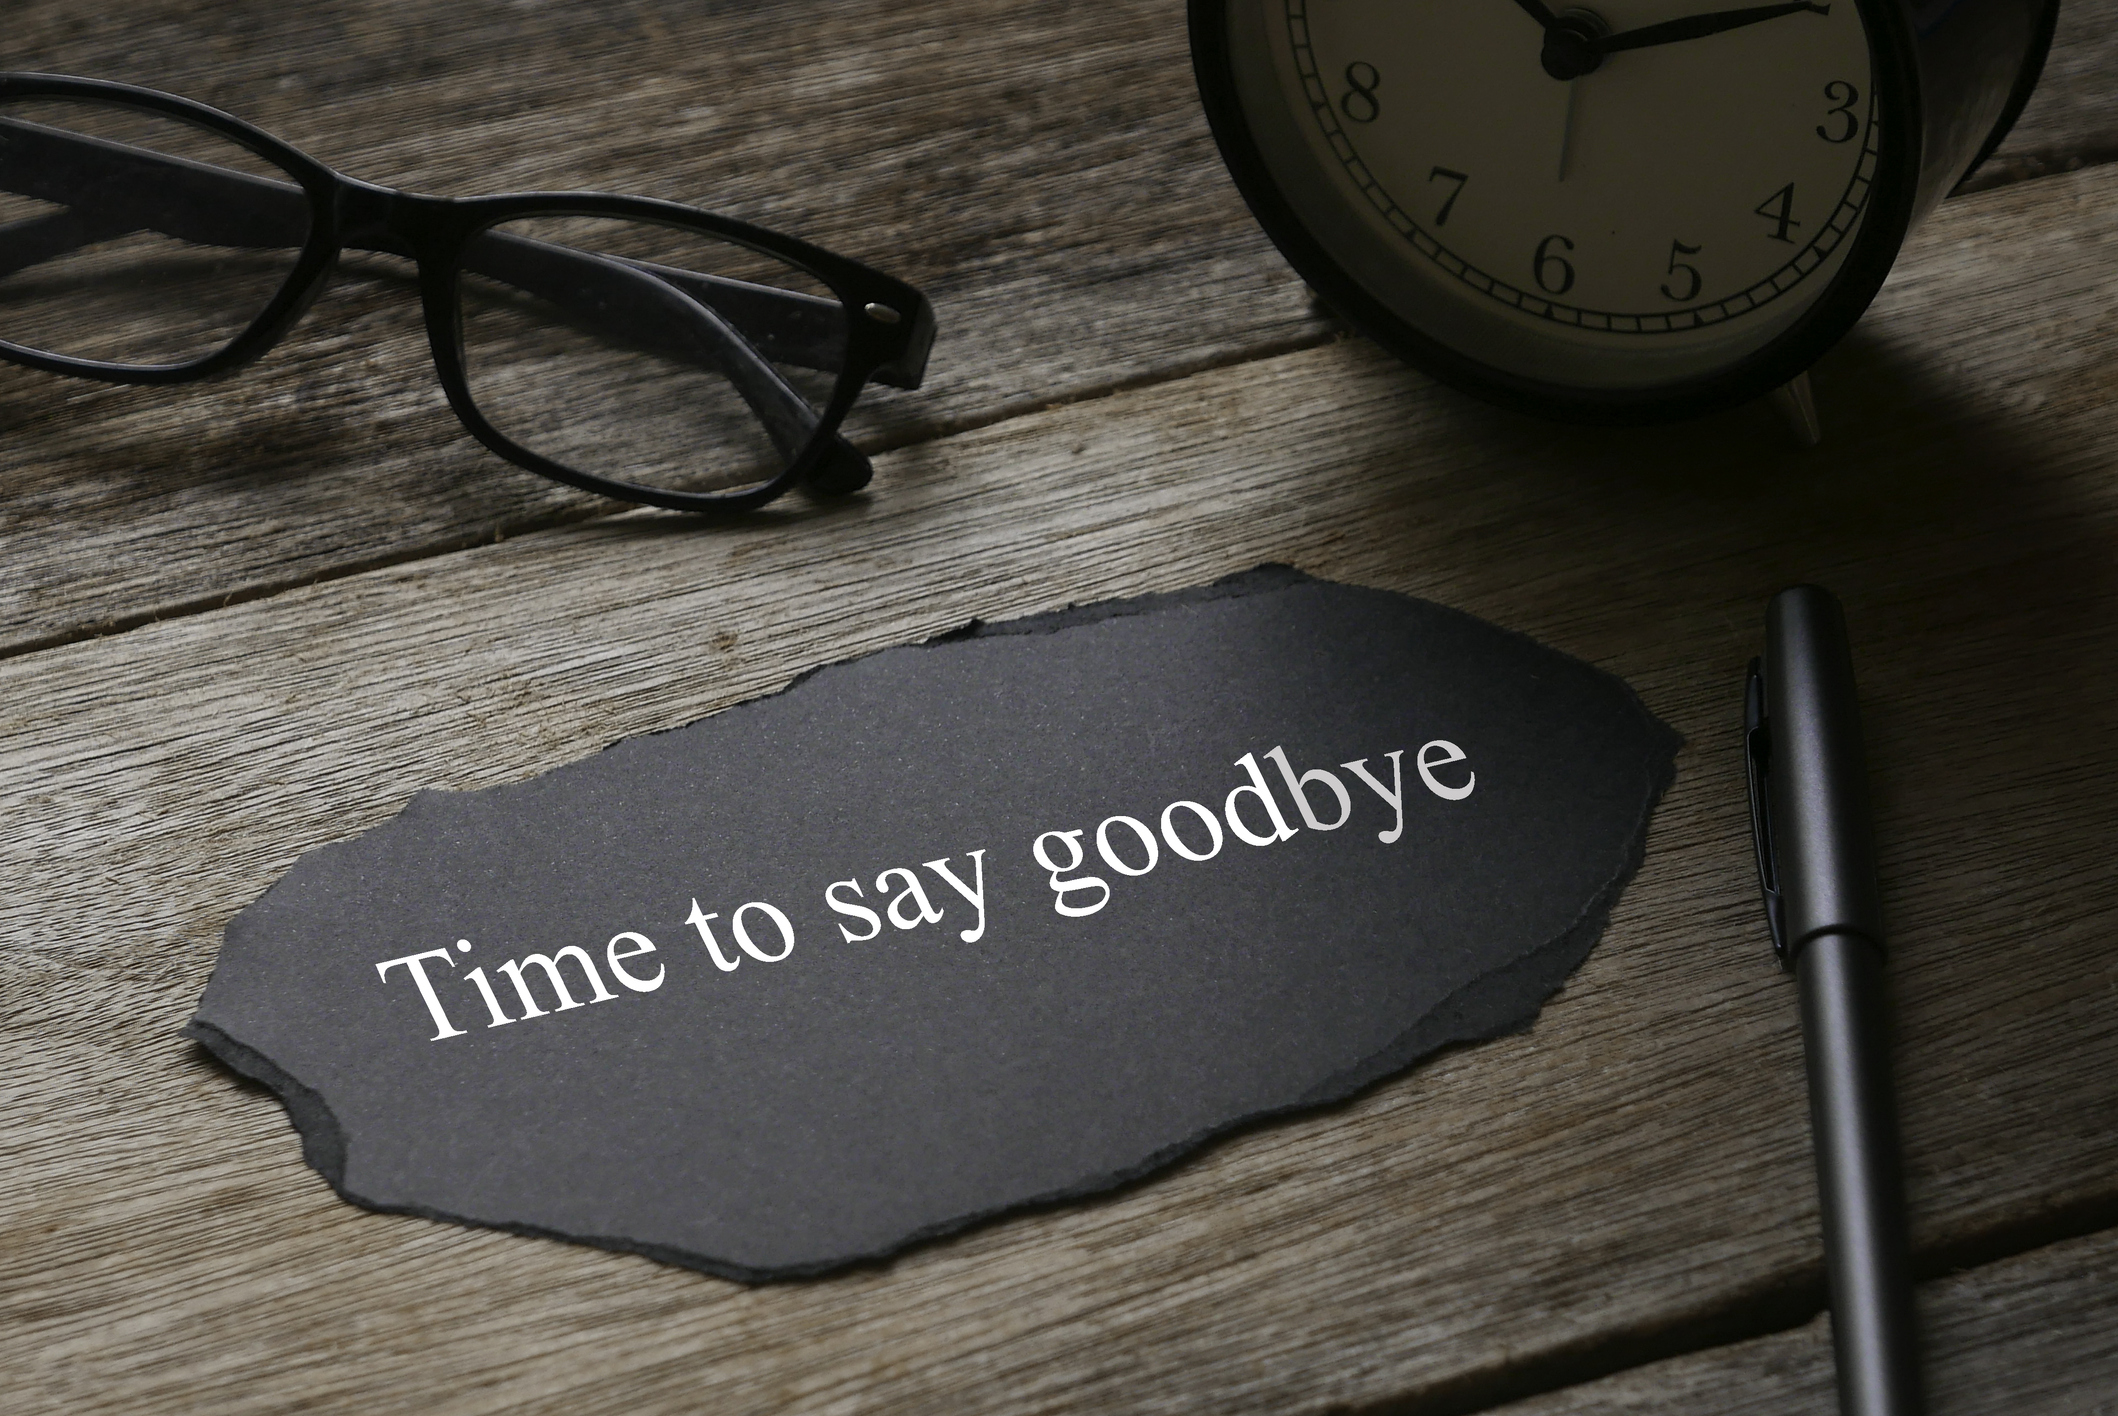 Glasses,clock,pen and a piece of black paper written with Time to say goodbye on wooden background.